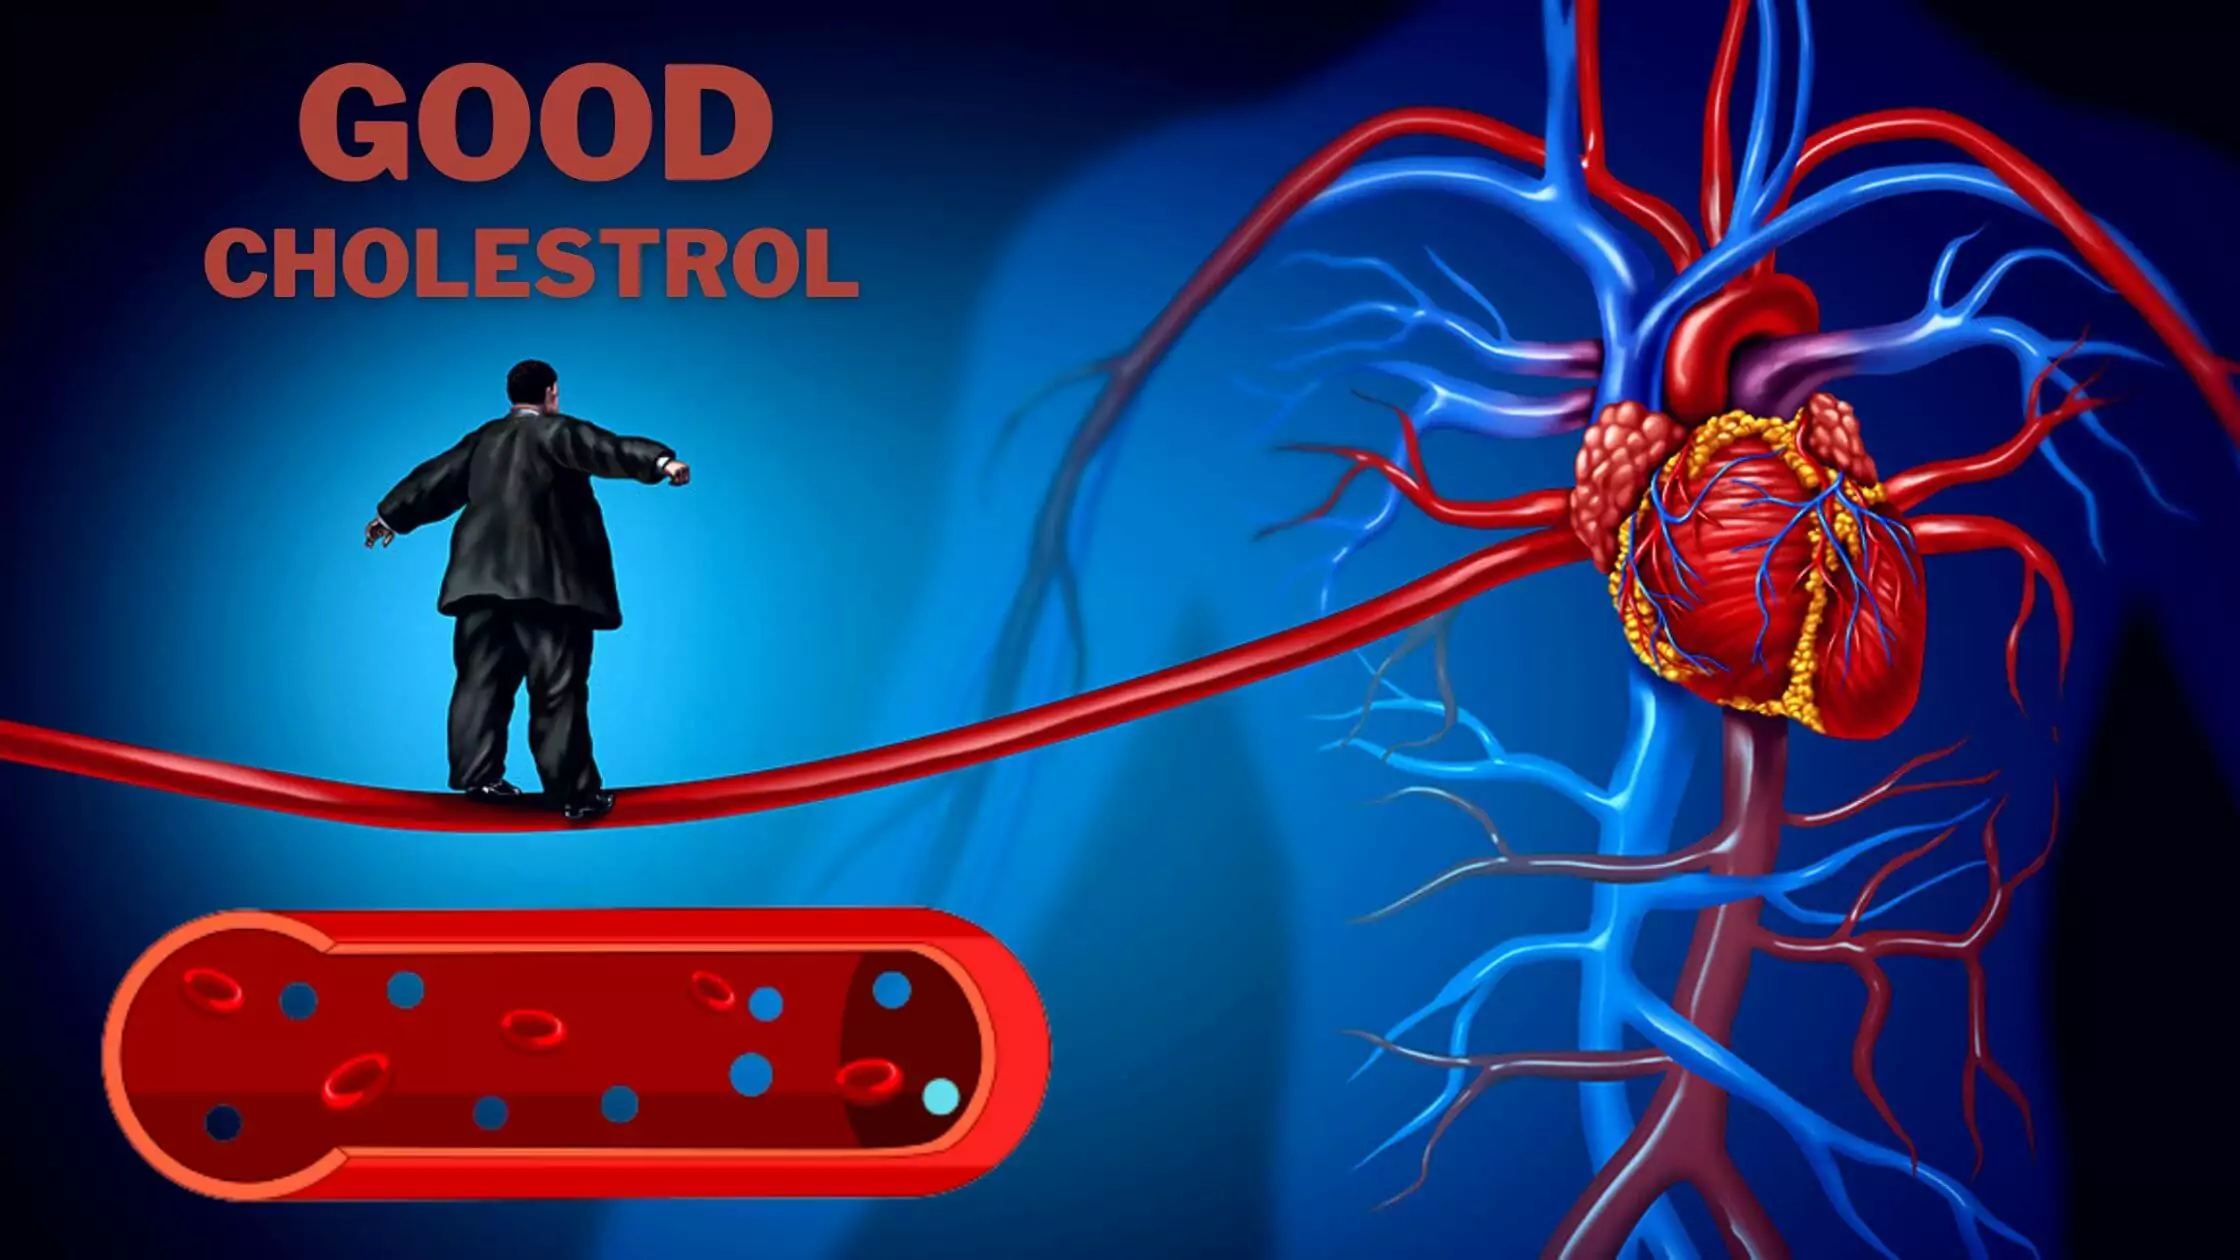 Study Challenges The Importance Of Good Cholesterol In Consistently Predicting Risk Of Heart Disease